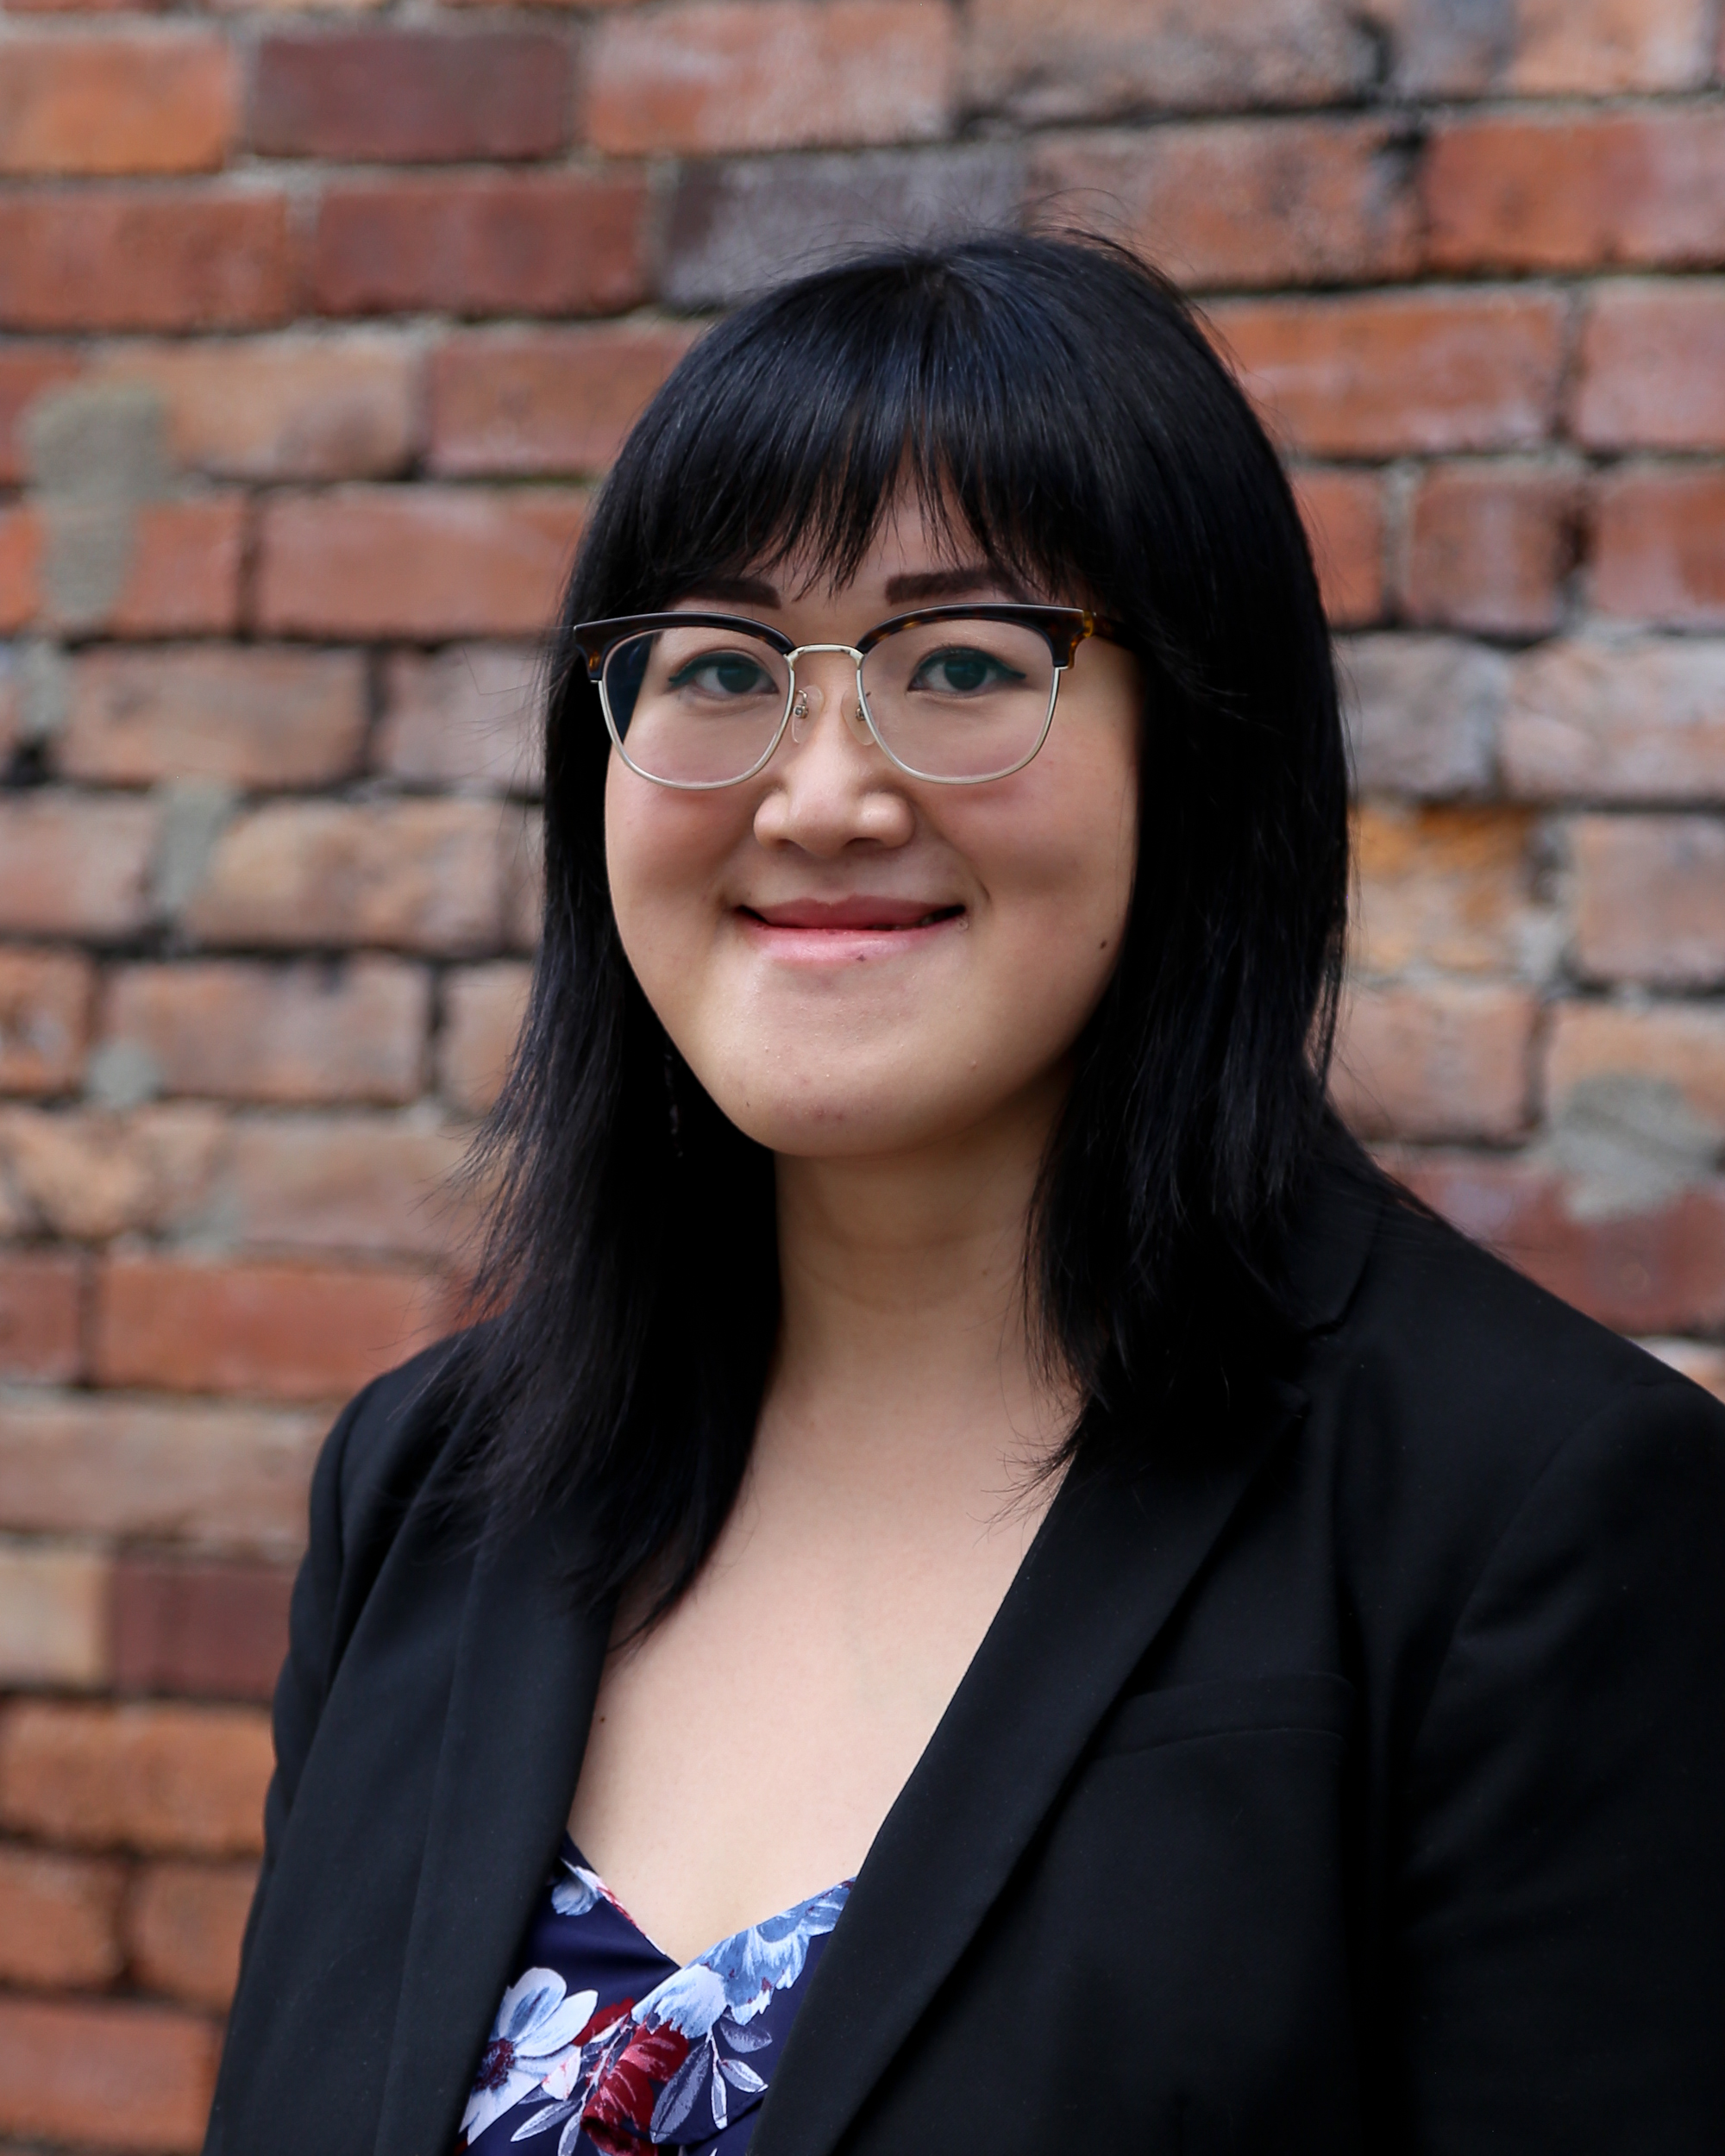 Chinese Canadian woman with mid-length black hair and bangs wearing a glasses, a black blazer and a patterned blouse